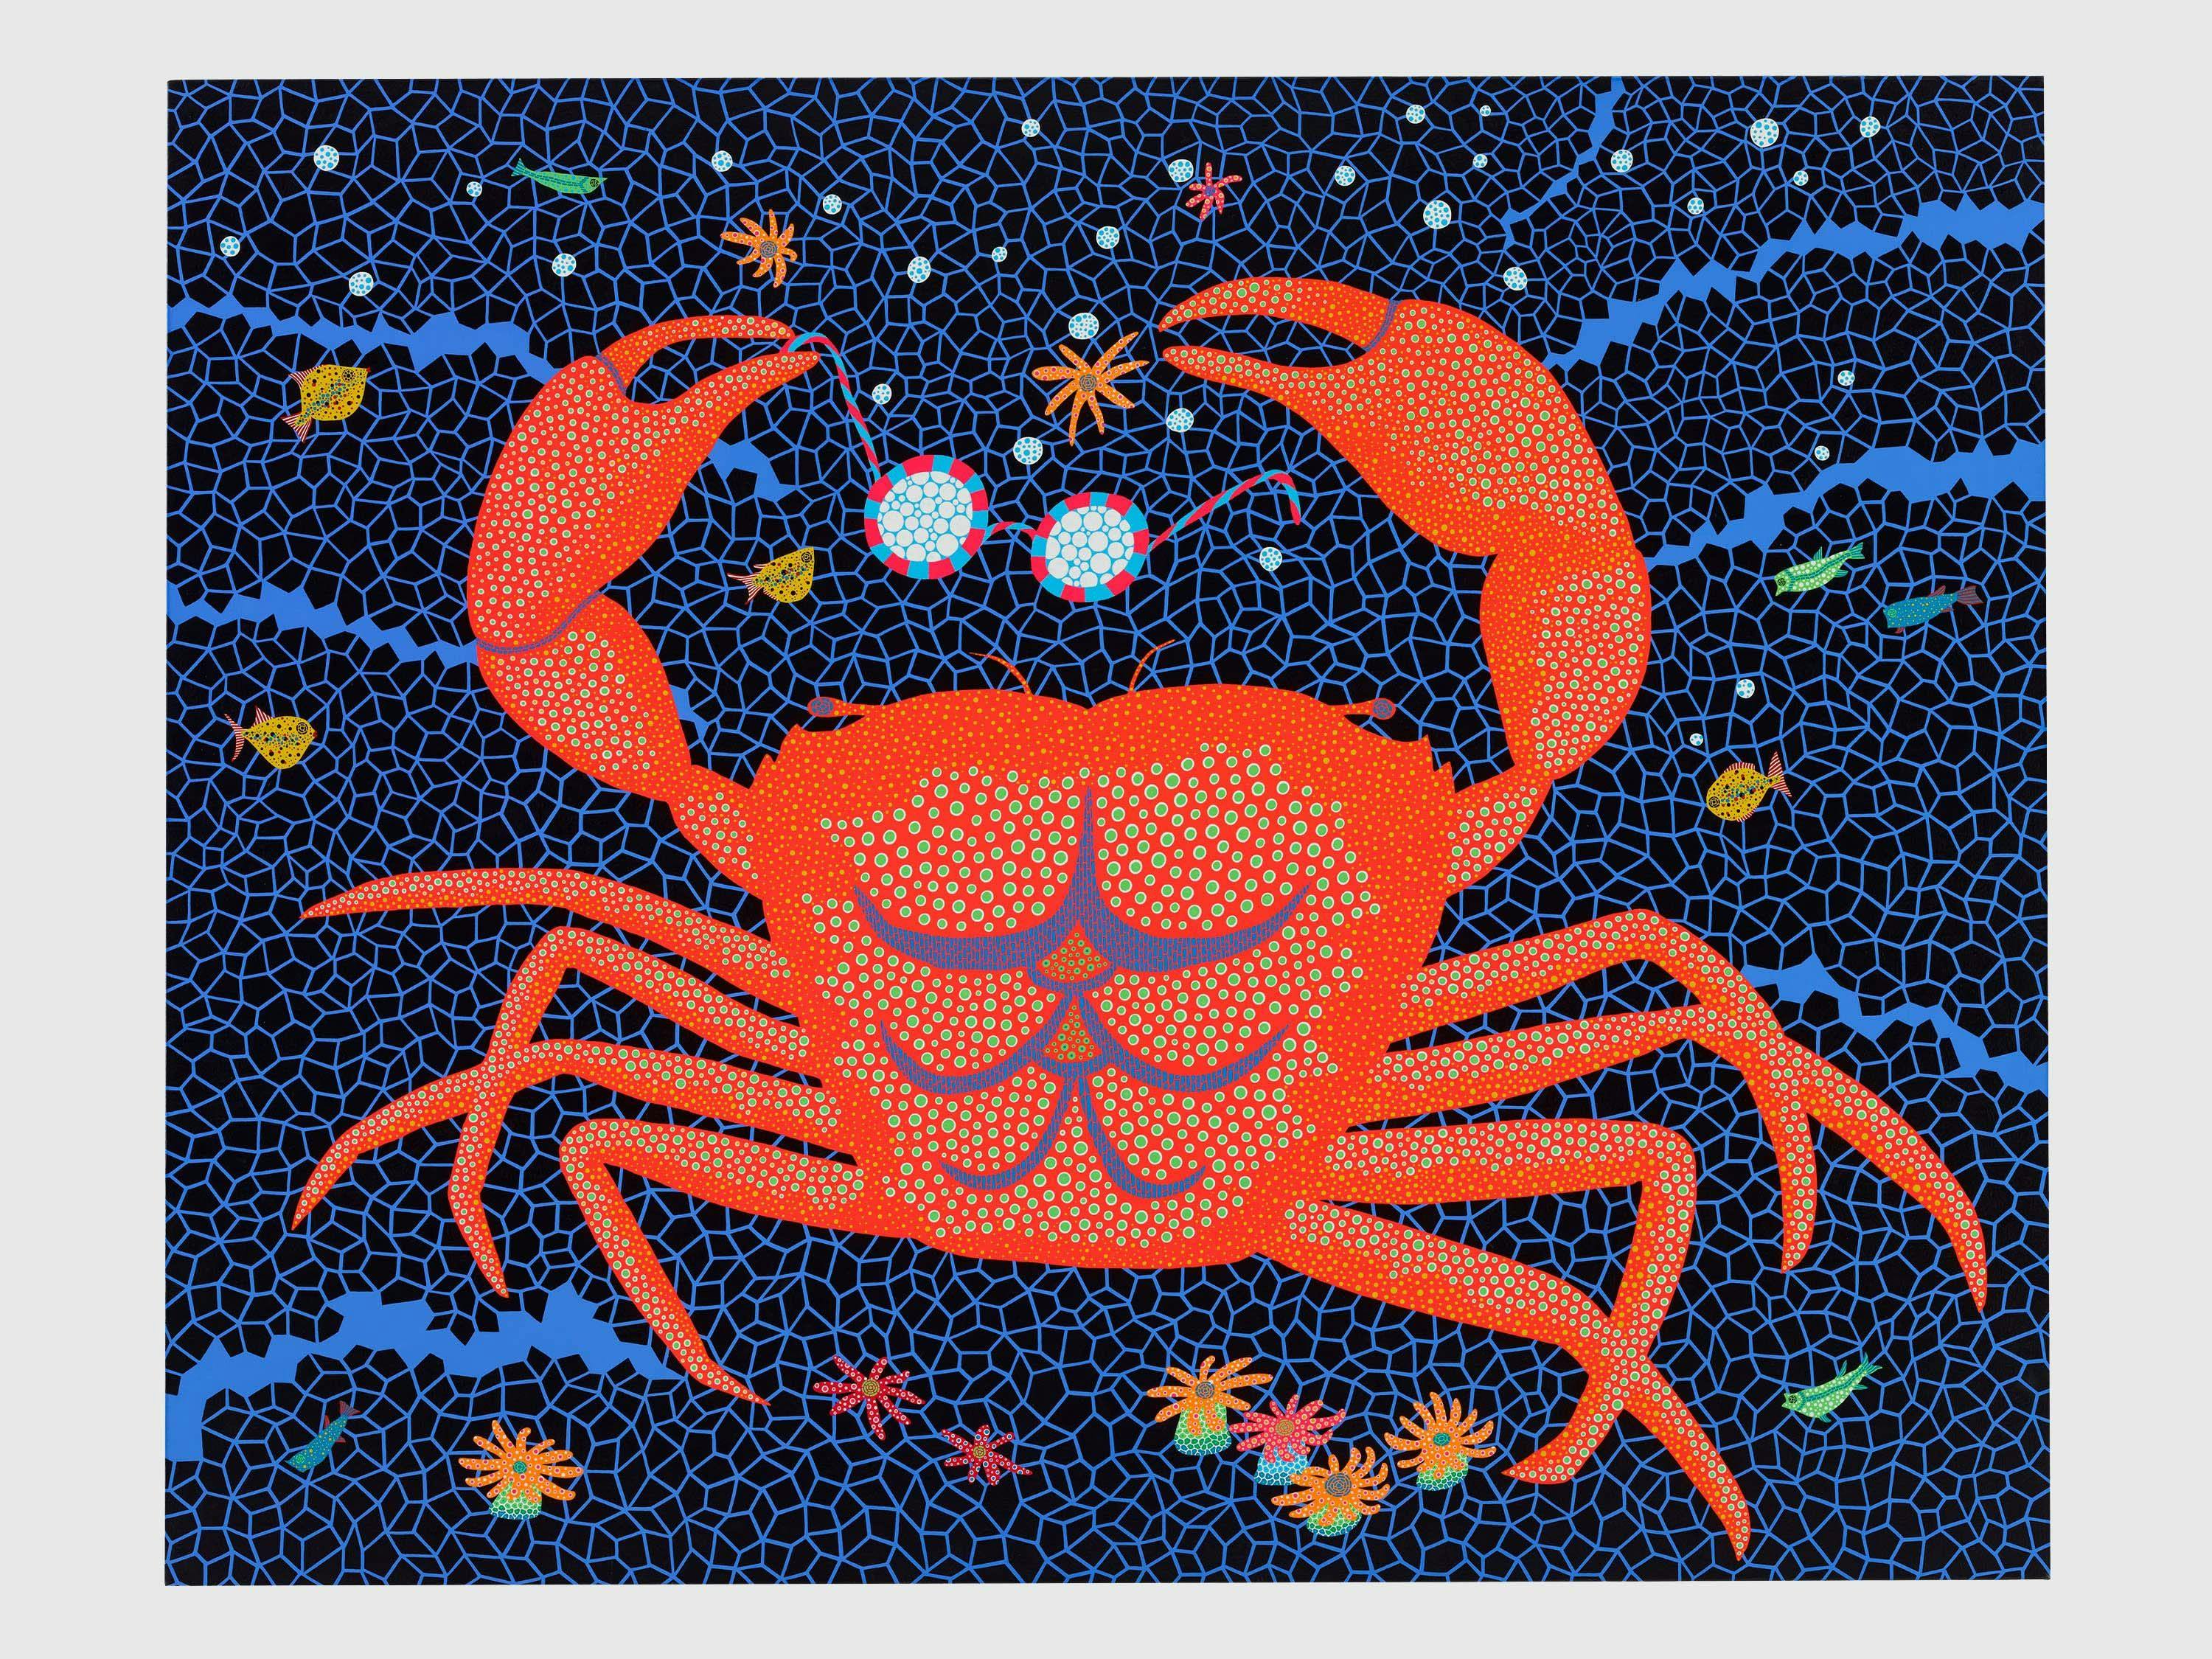 A painting by Yayoi Kusama, titled A-CRAB, dated 2008.